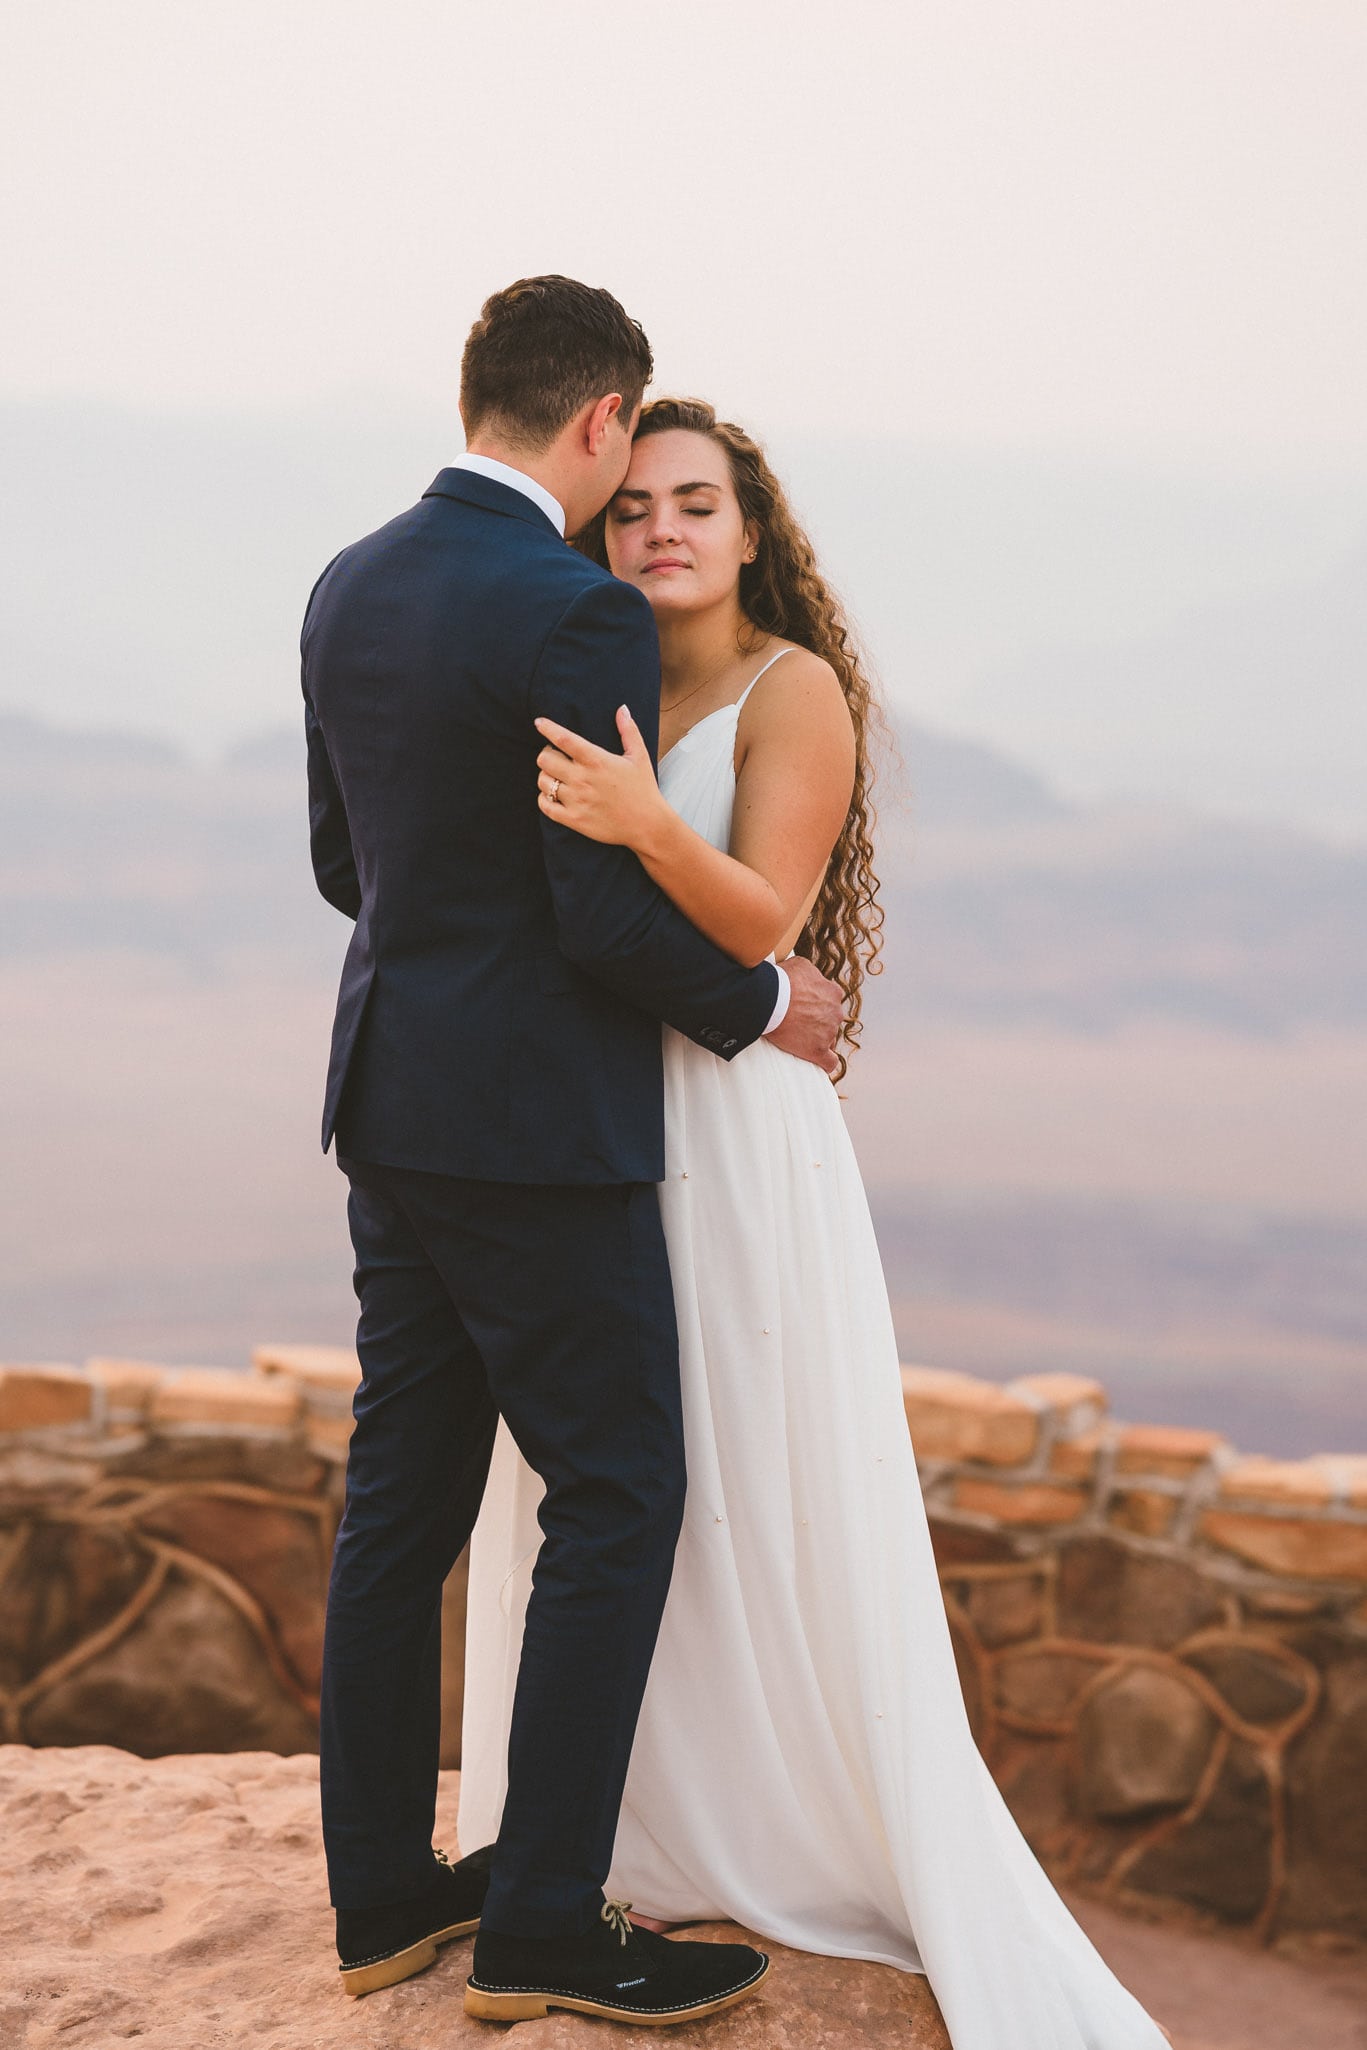 Intimate wedding photos at Dead Horse Point